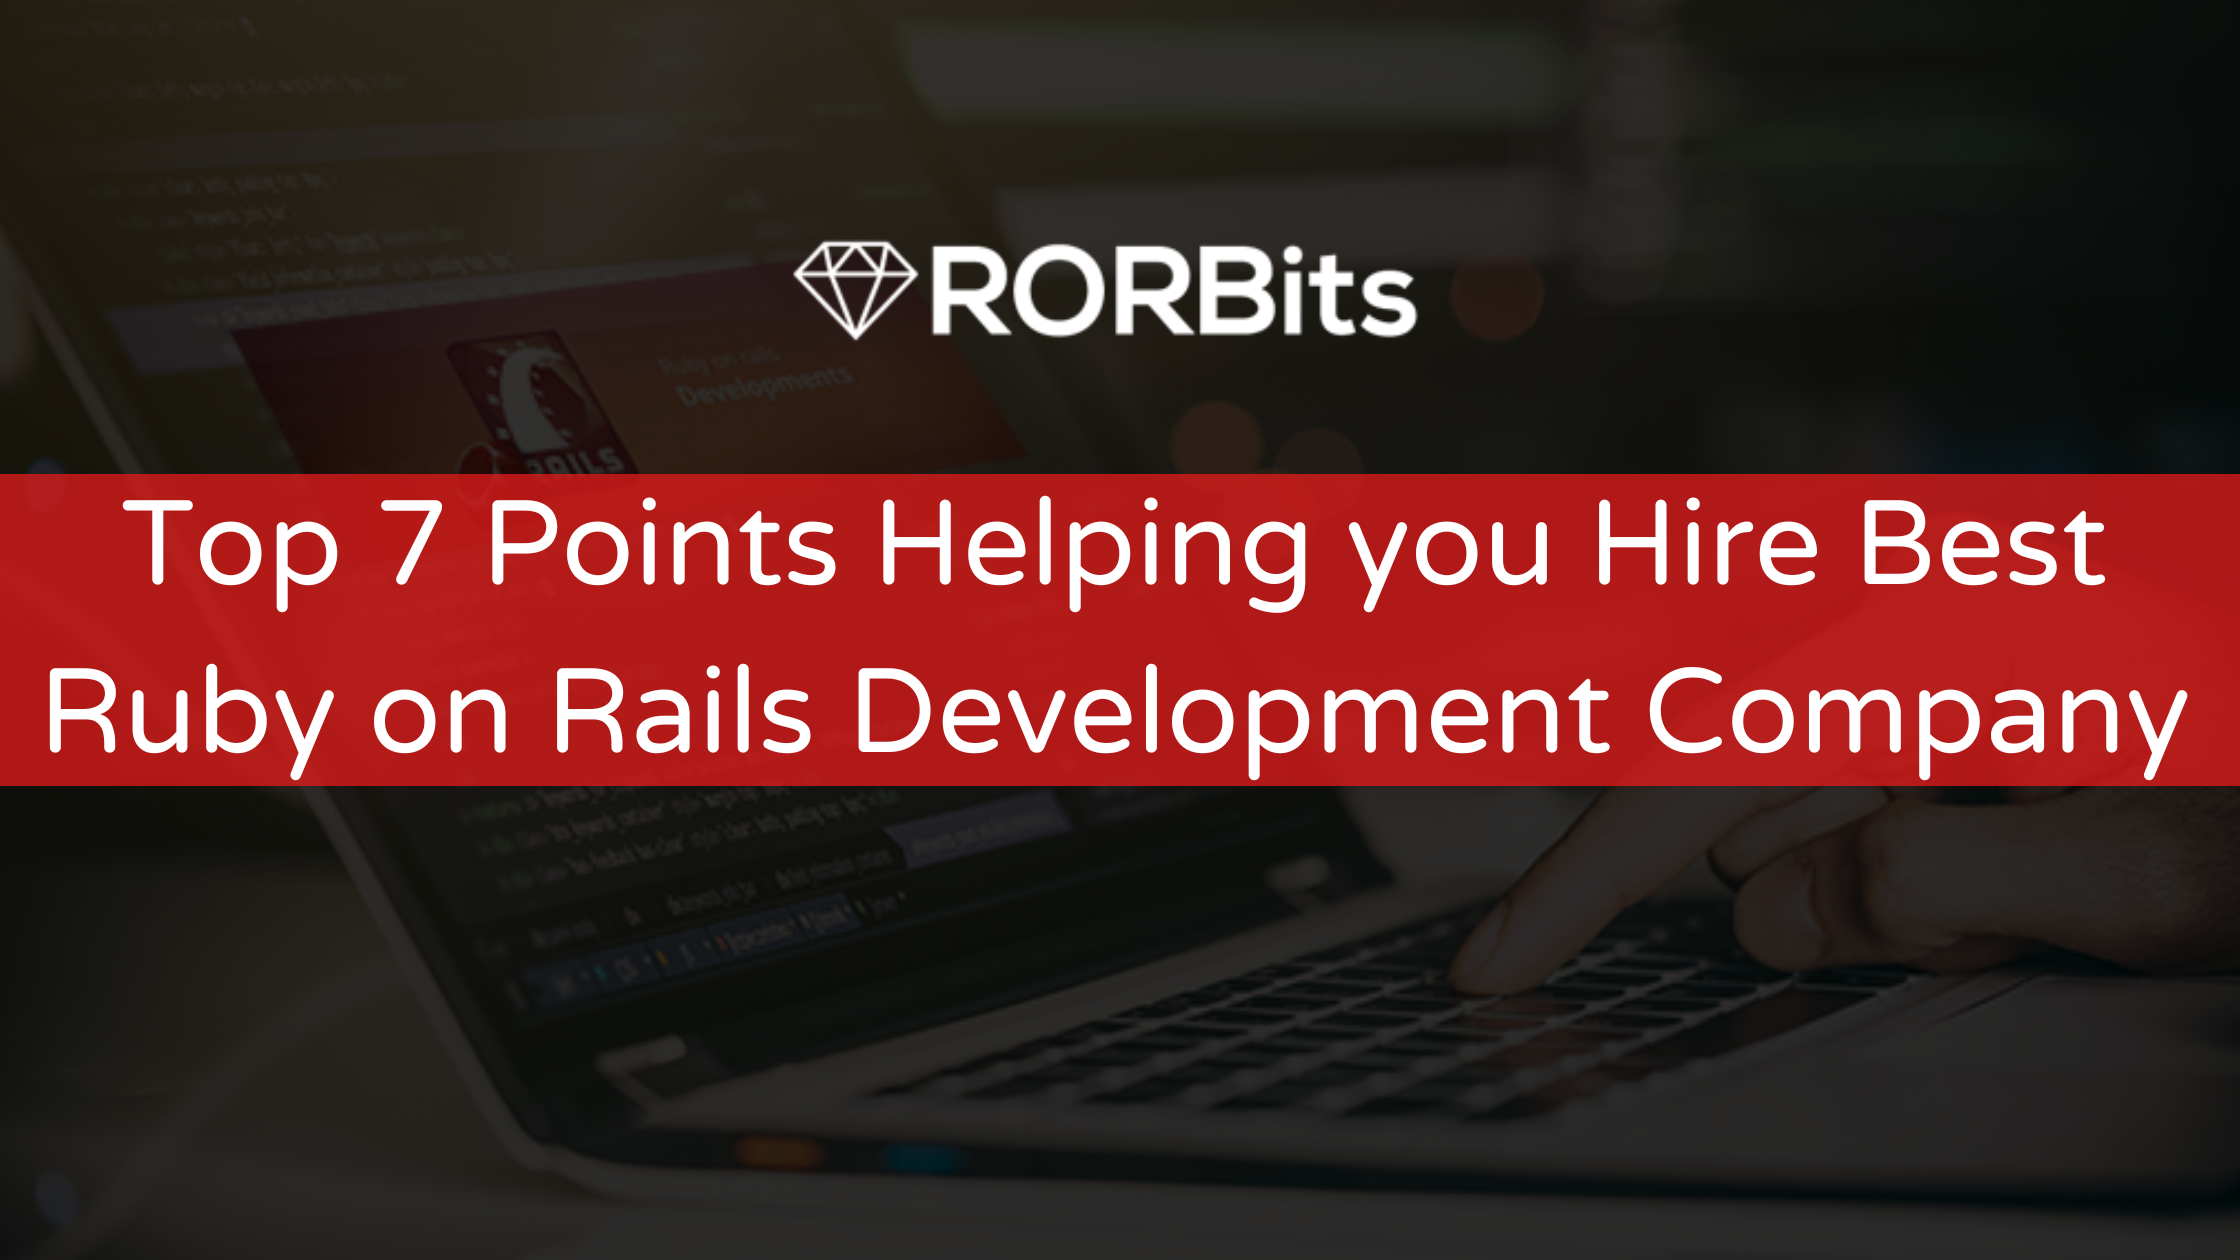 Top 7 Points Helping you Hire Best Ruby on Rails Development Company